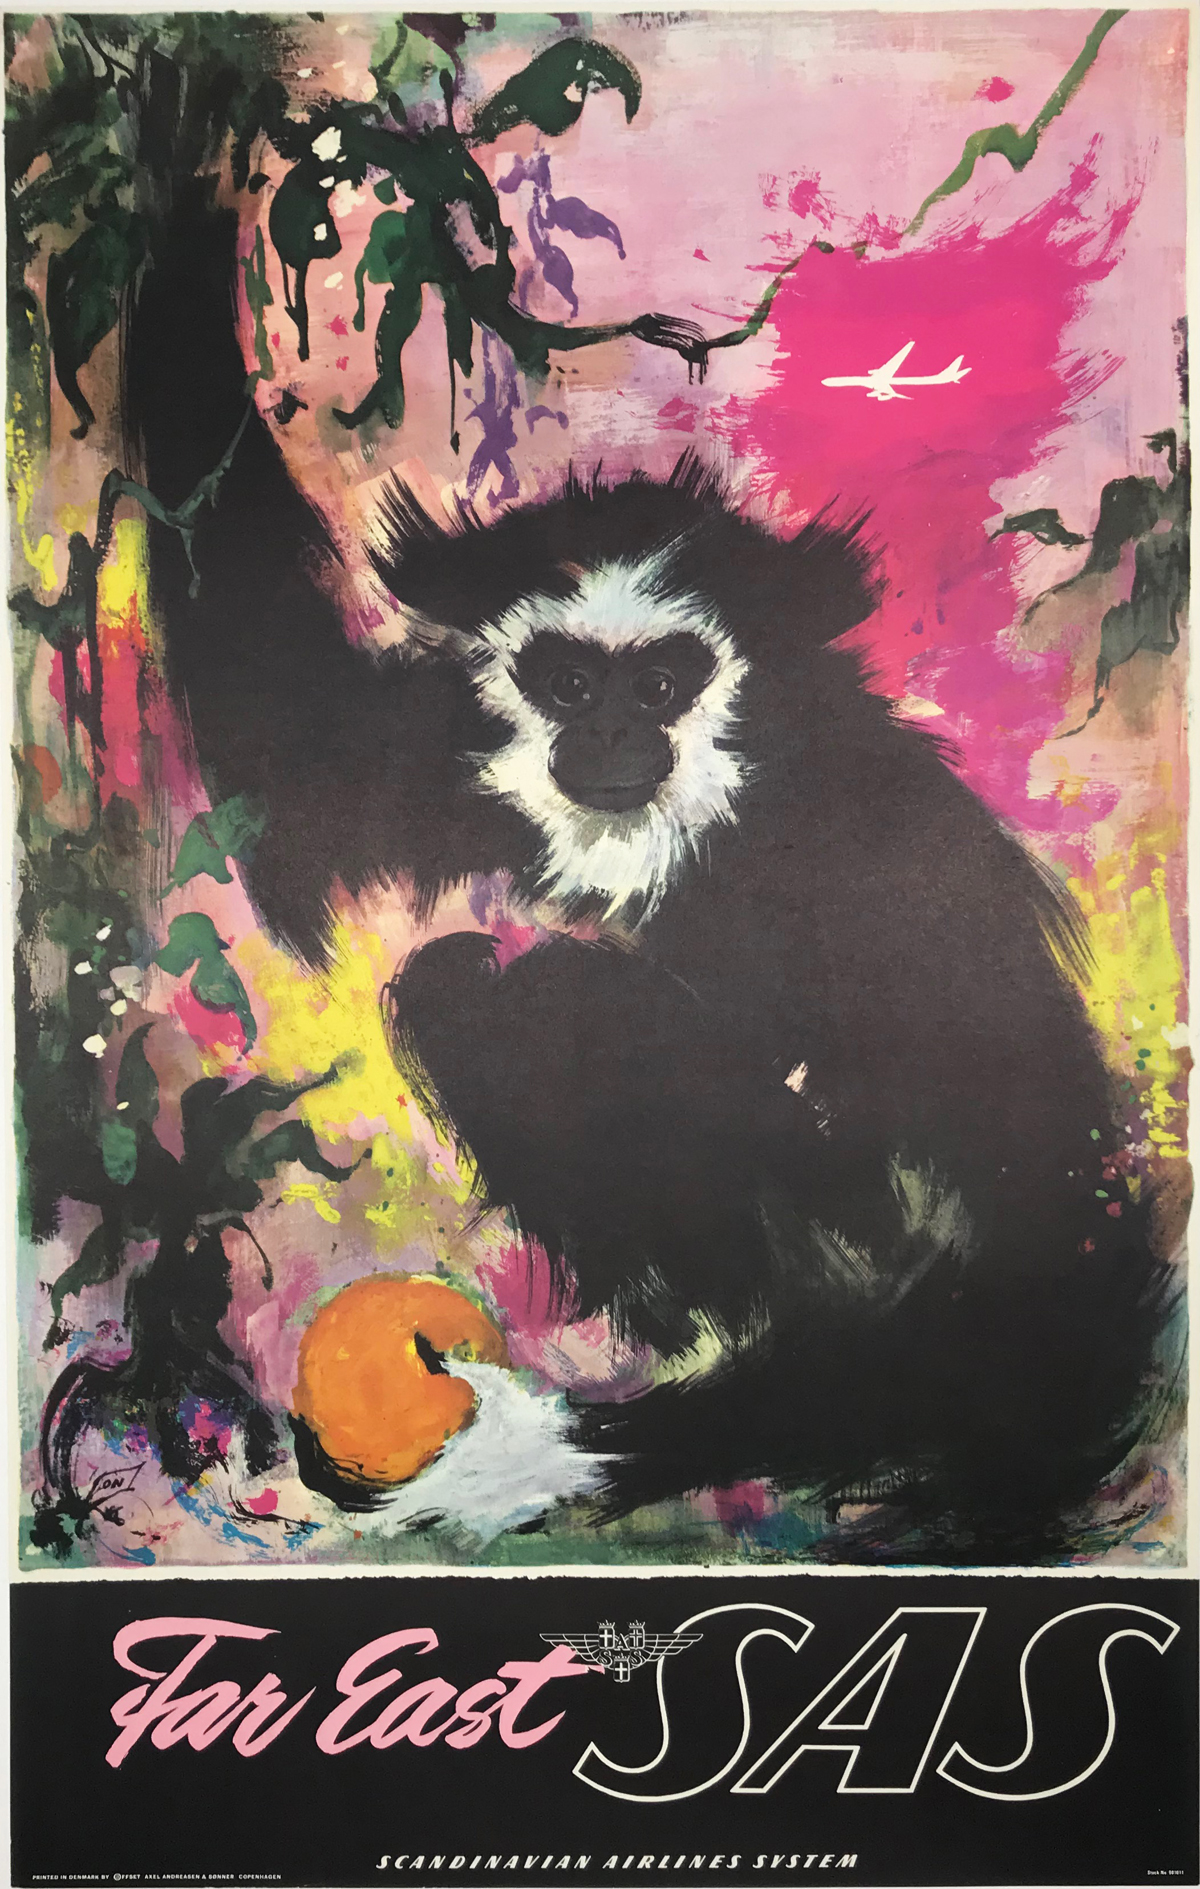 Far East SAS Airlines Monkey original 1962 travel poster by Otto Nielsen.